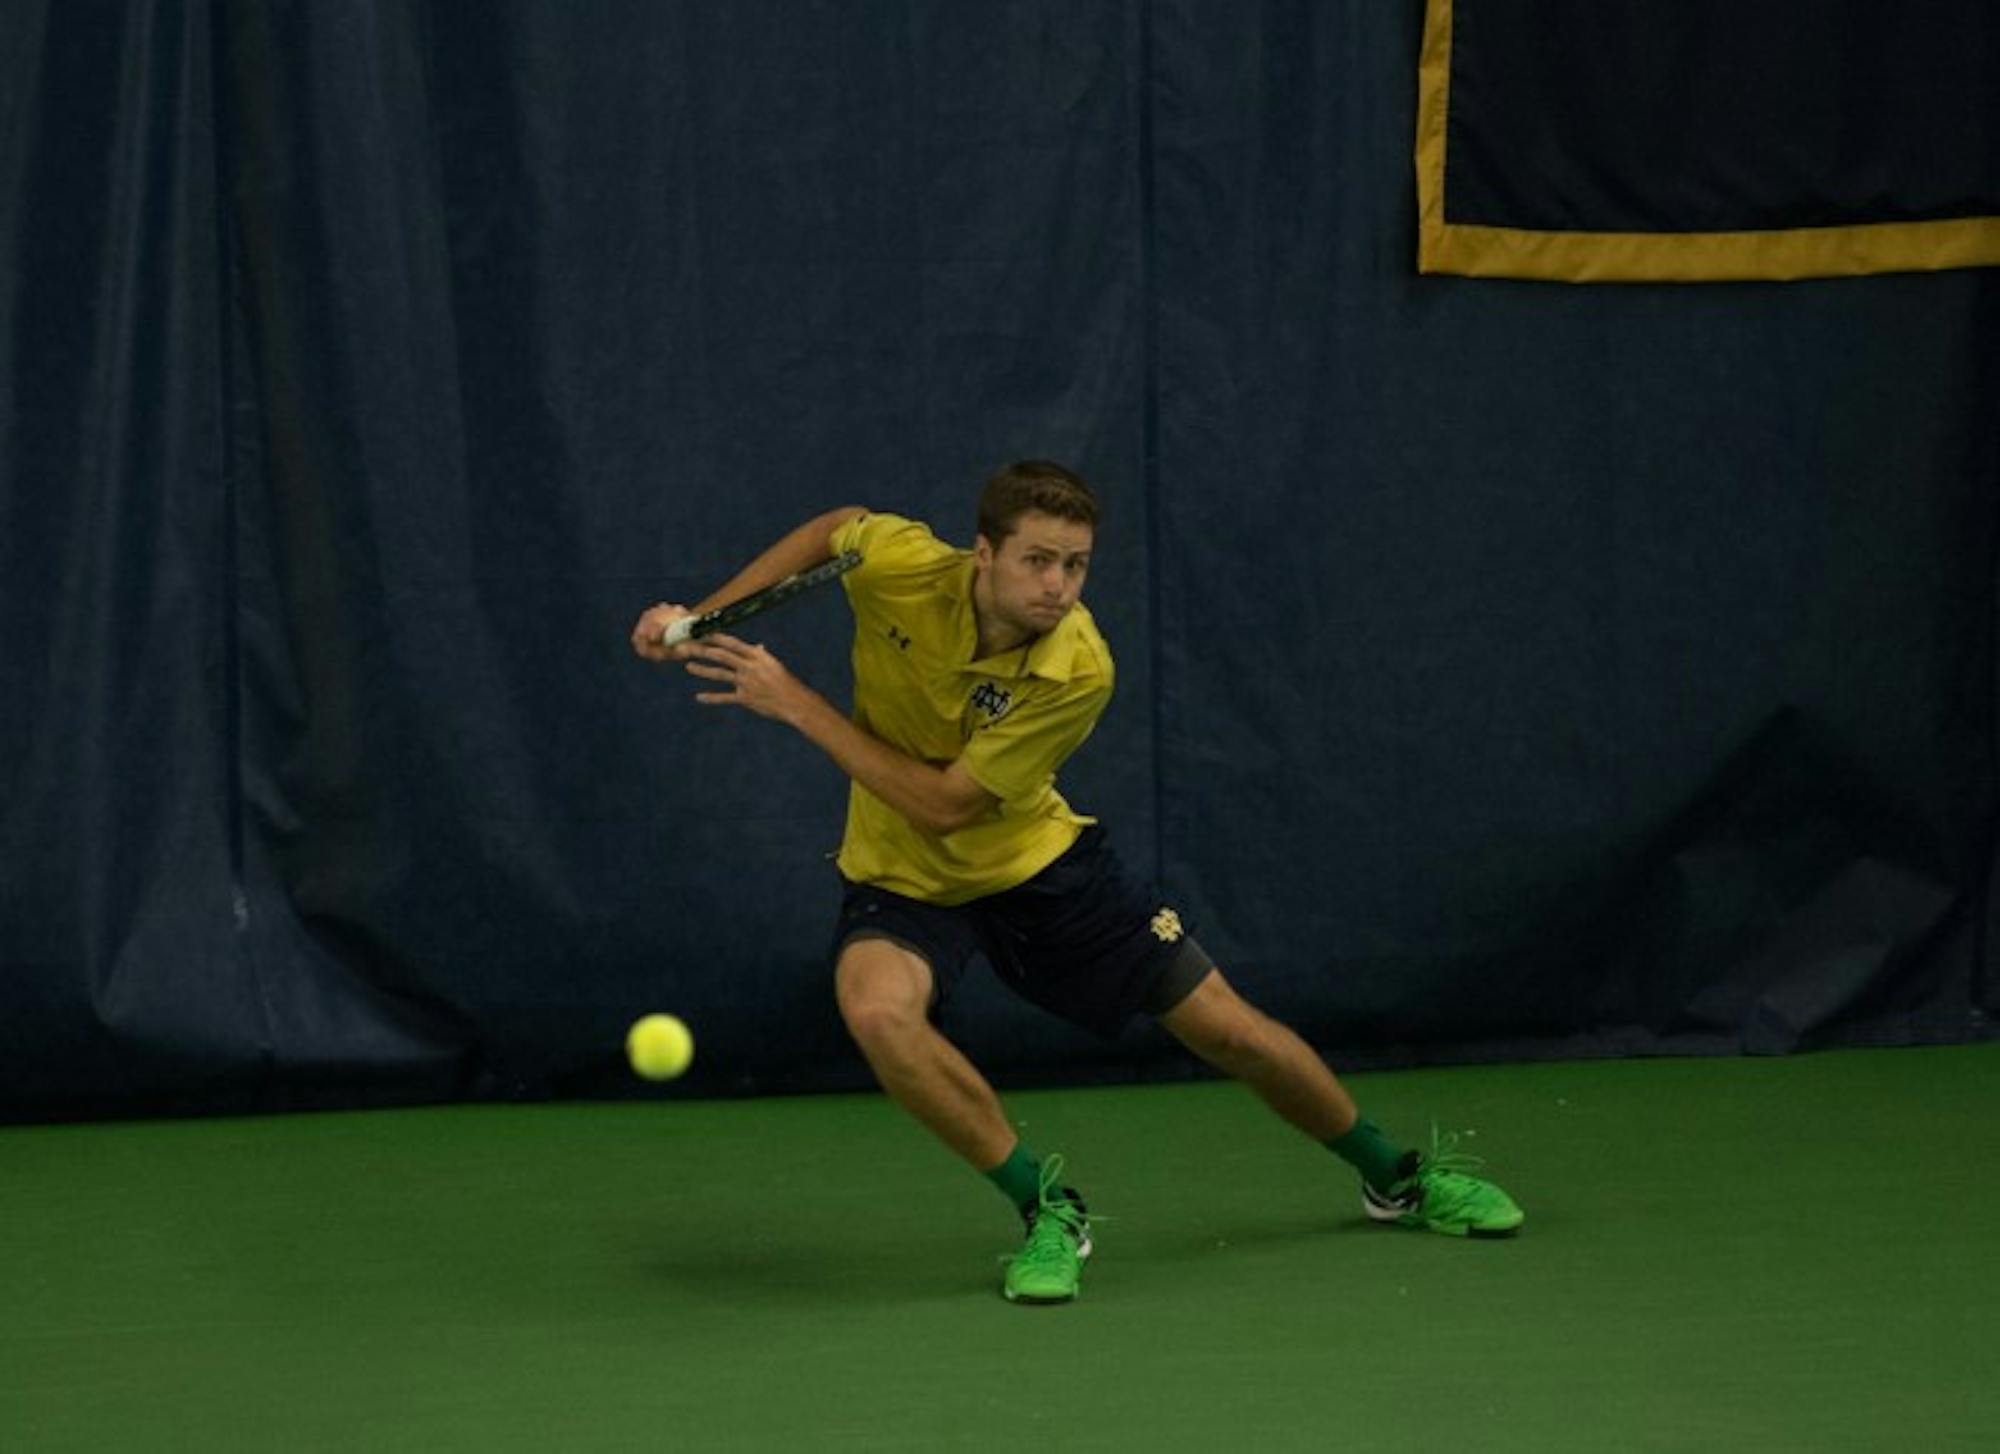 Irish senior Quentin Monaghan rushes to return a ball during Notre Dame’s 5-2 victory over Duke on March 18 at Eck Tennis Pavilion.